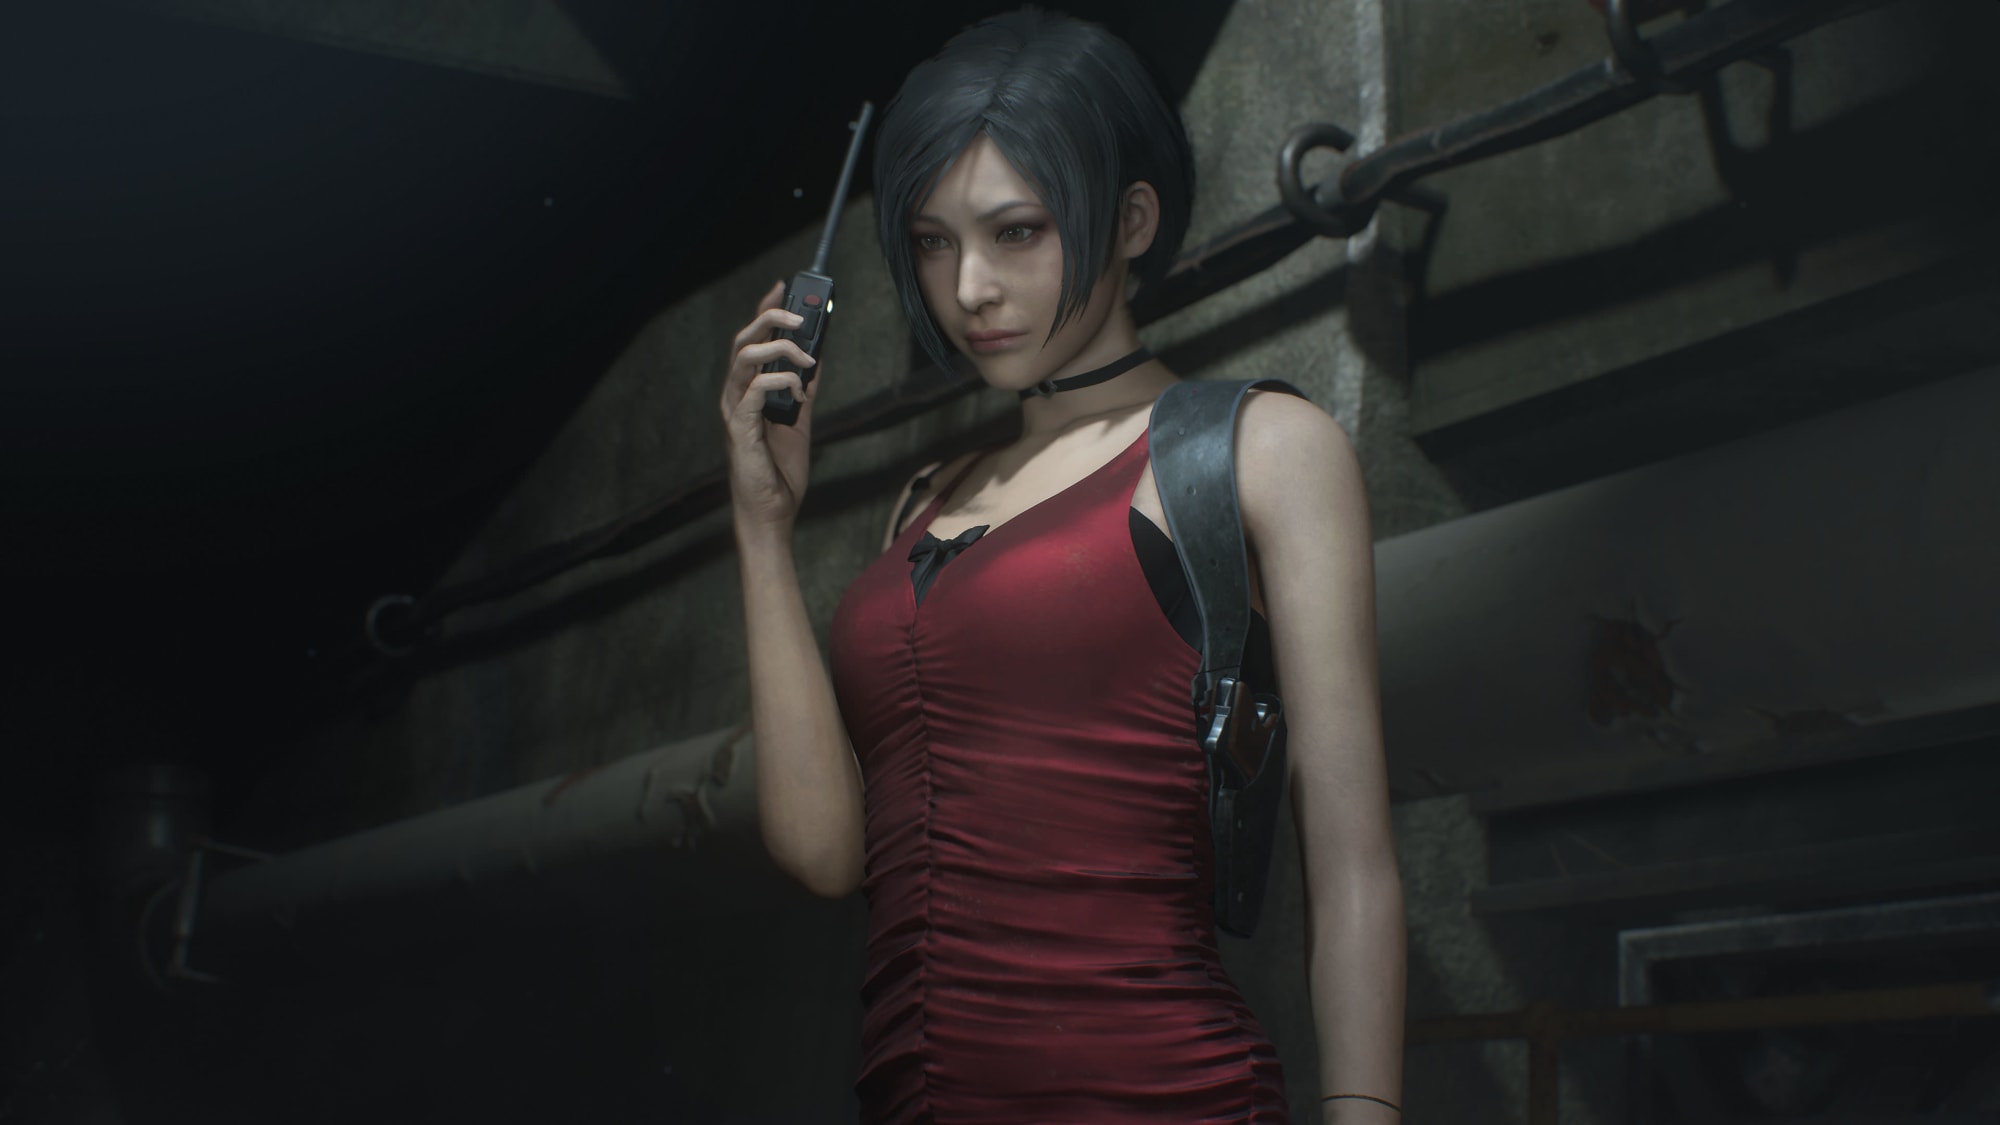 Resident Evil Re:Verse gameplay shows humans facing off against Tyrants